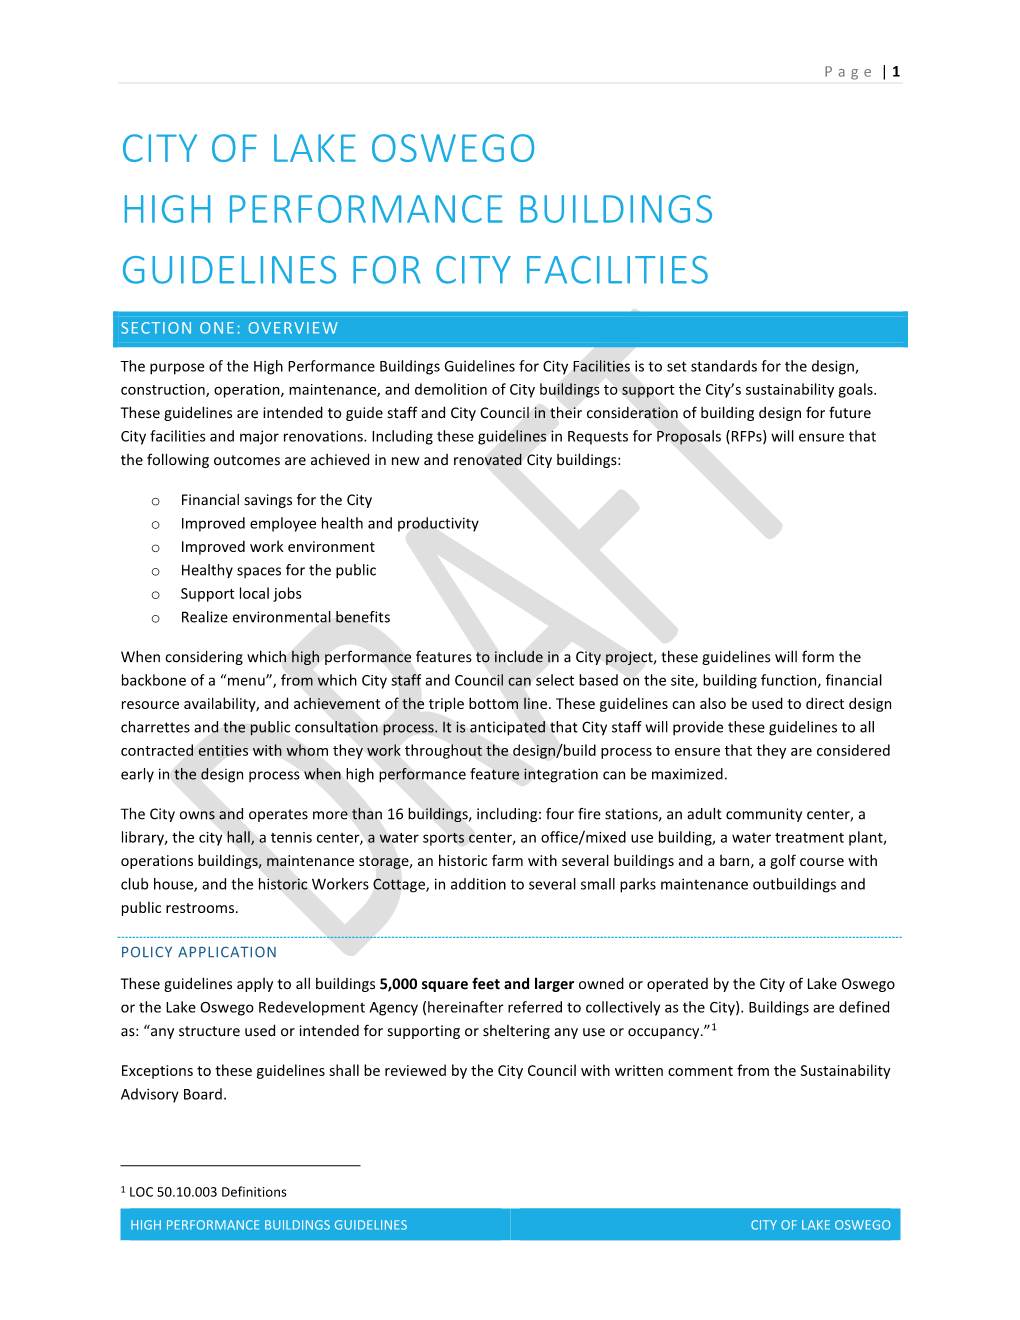 High Performance Buildings Guidelines for City Facilities